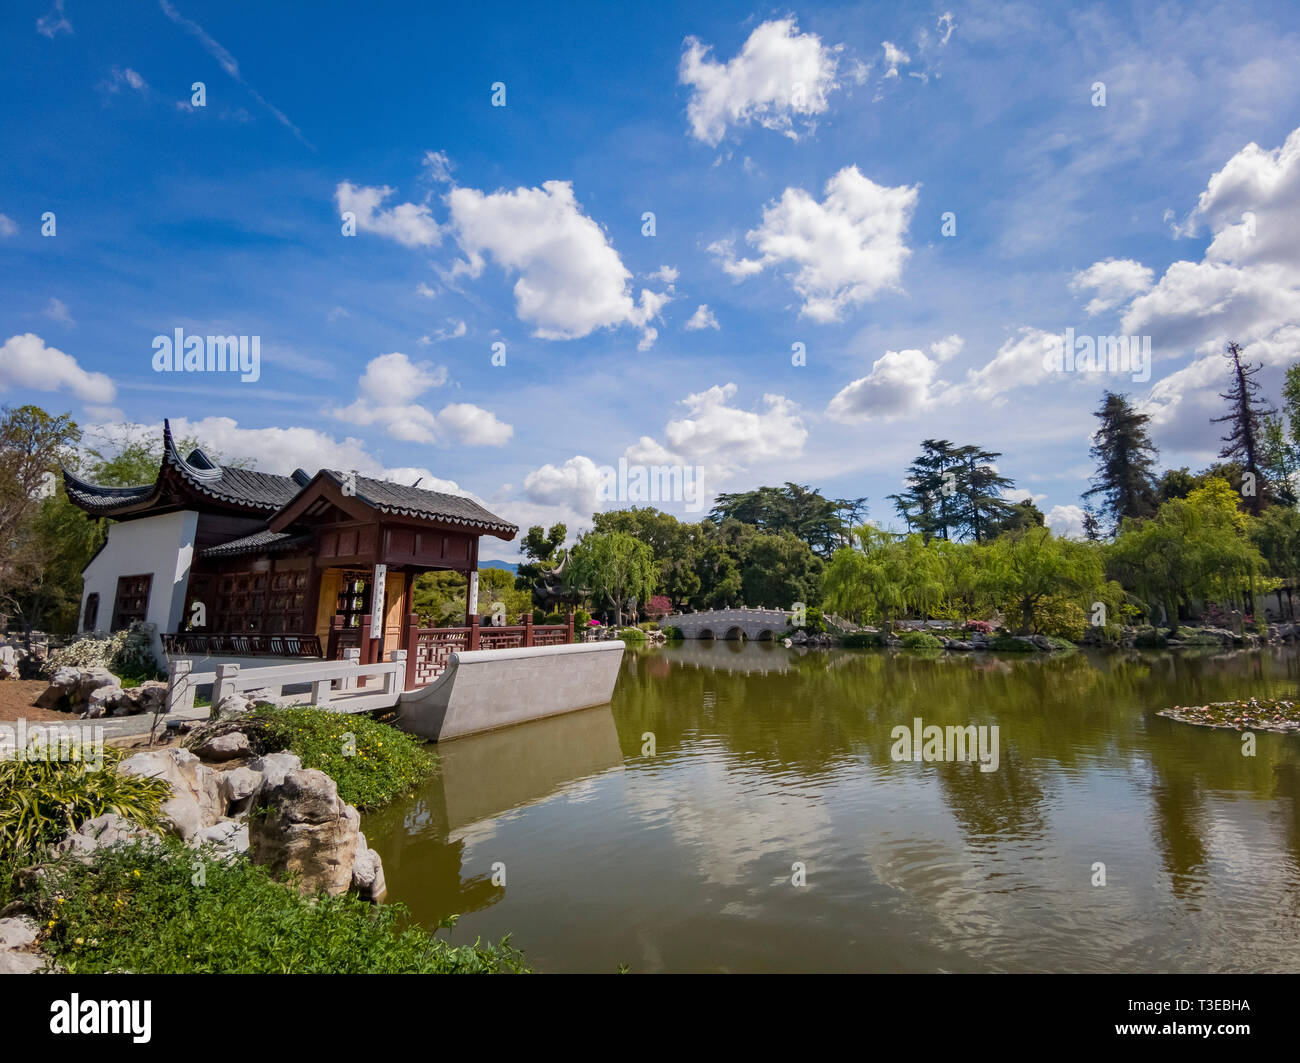 Los Angeles, APR 5: The beautiful Chinese Garden of Huntington Library on APR 5, 2019 at Los Angeles, California Stock Photo